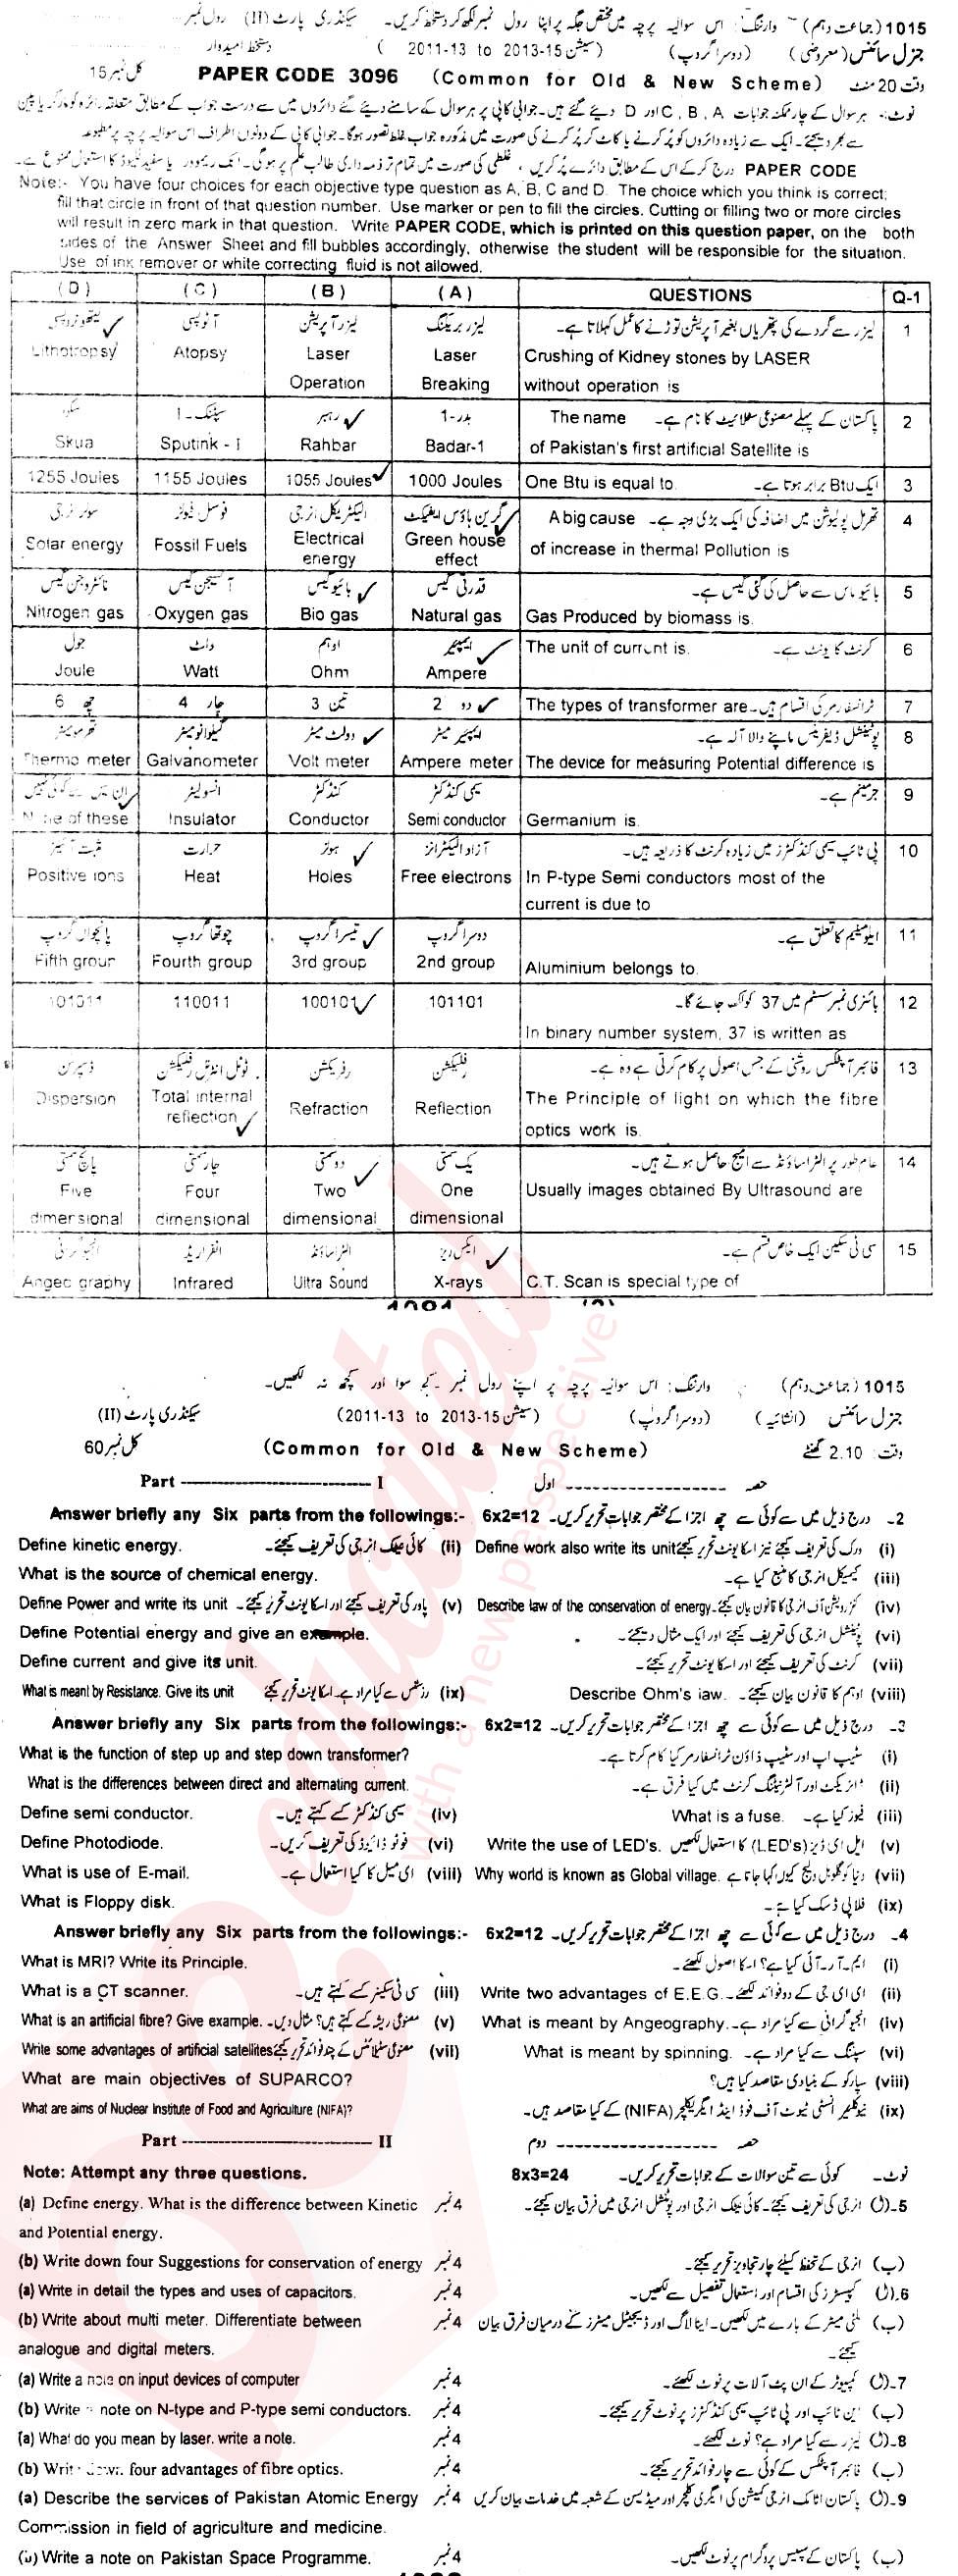 General Science 10th class Past Paper Group 2 BISE Sargodha 2015